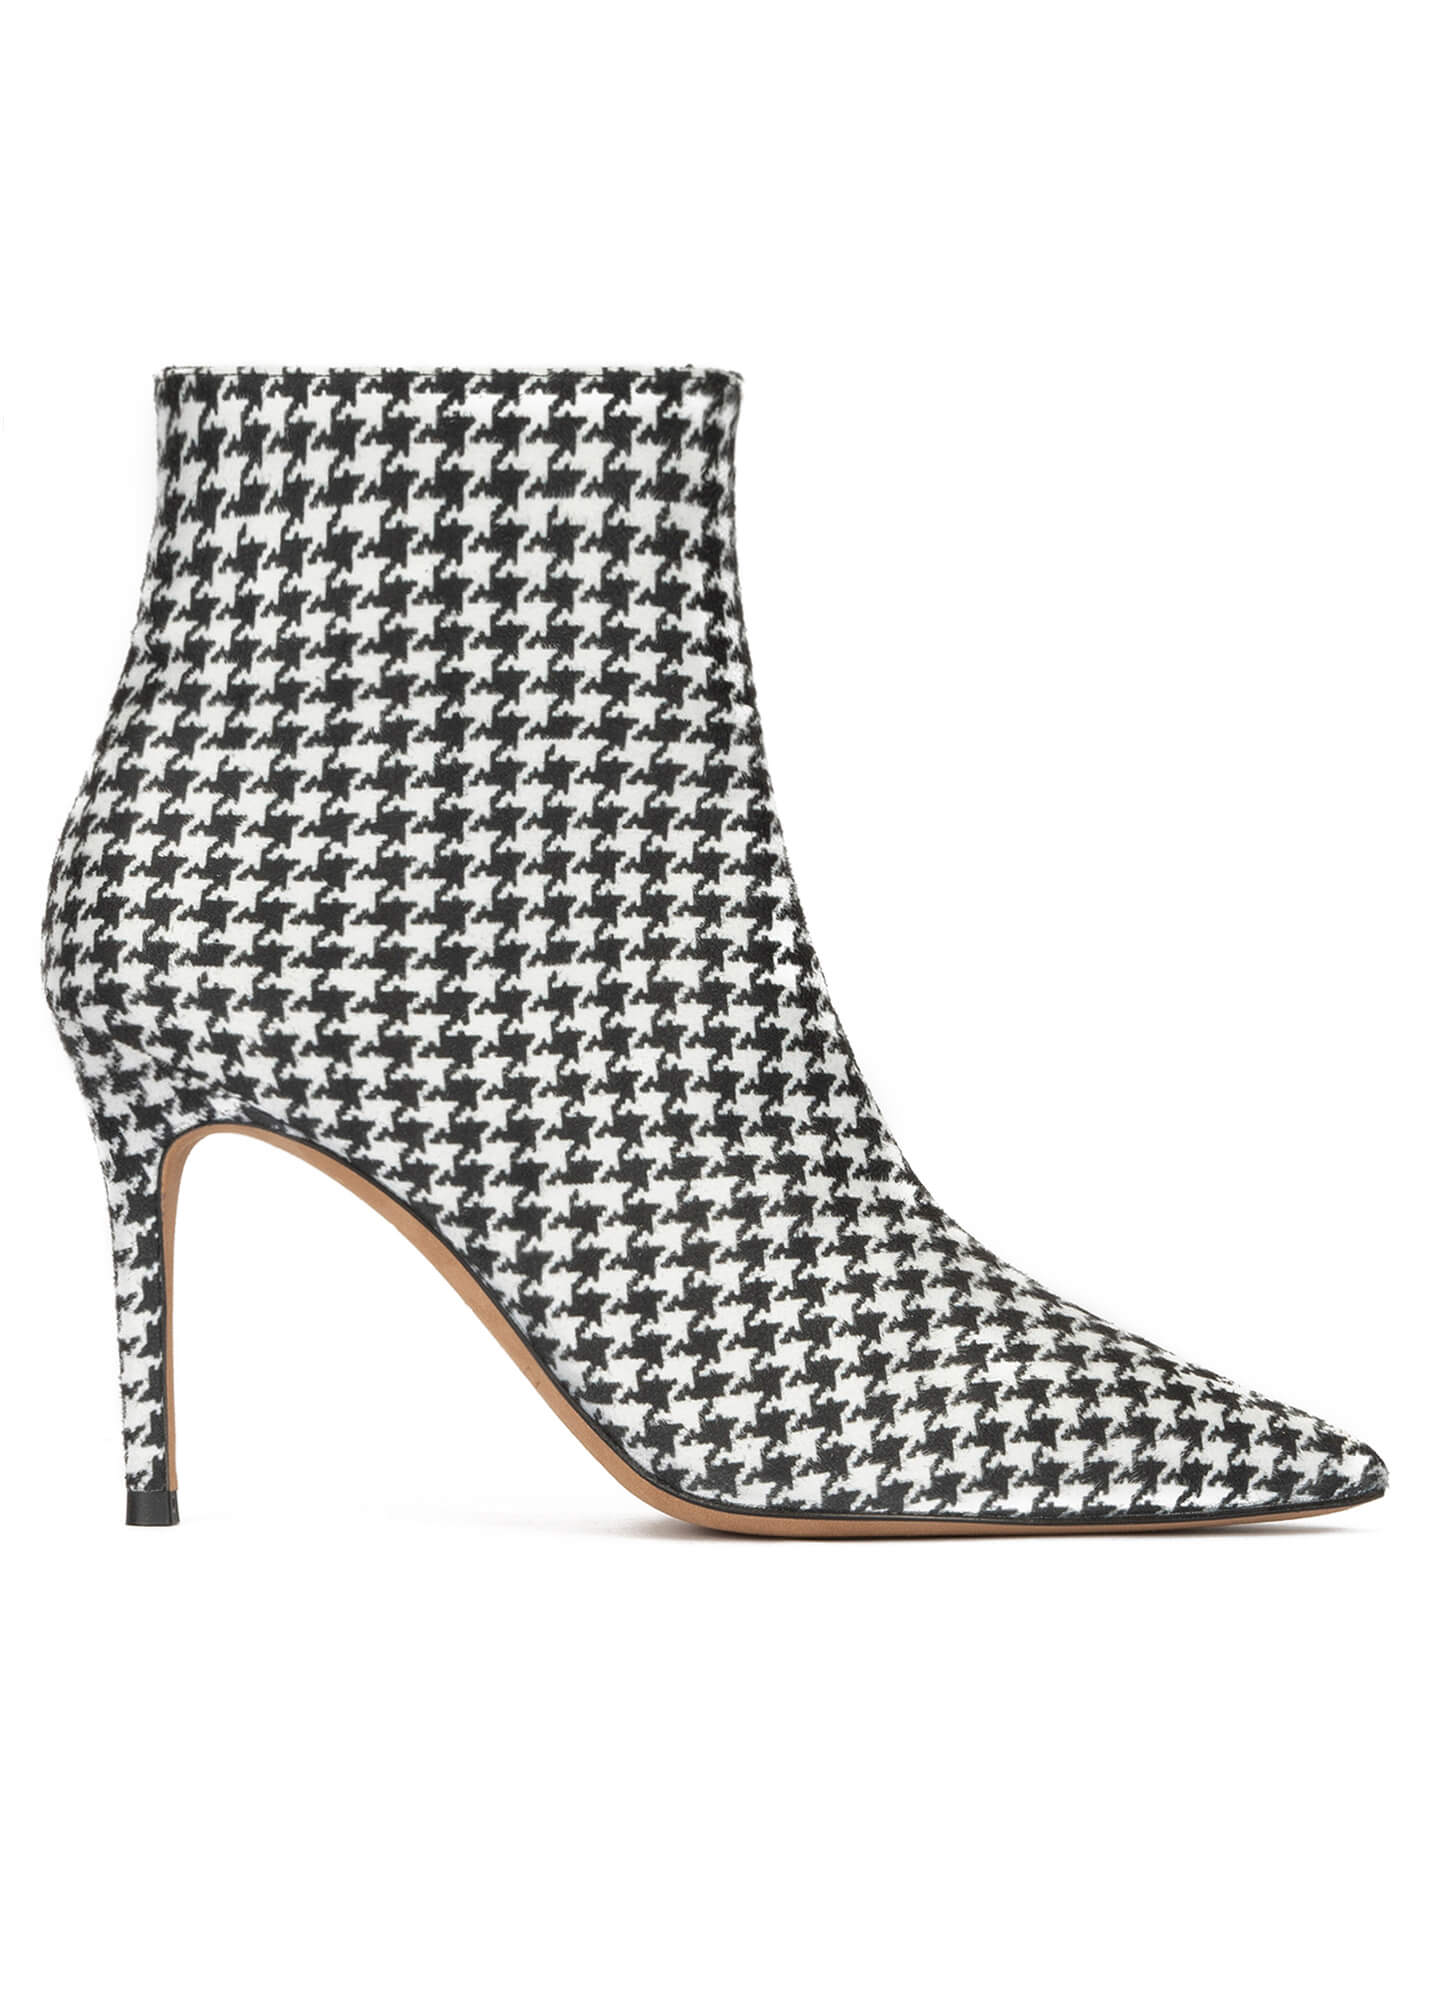 Houndstooth print point-toe heeled ankle boots . PURA LOPEZ